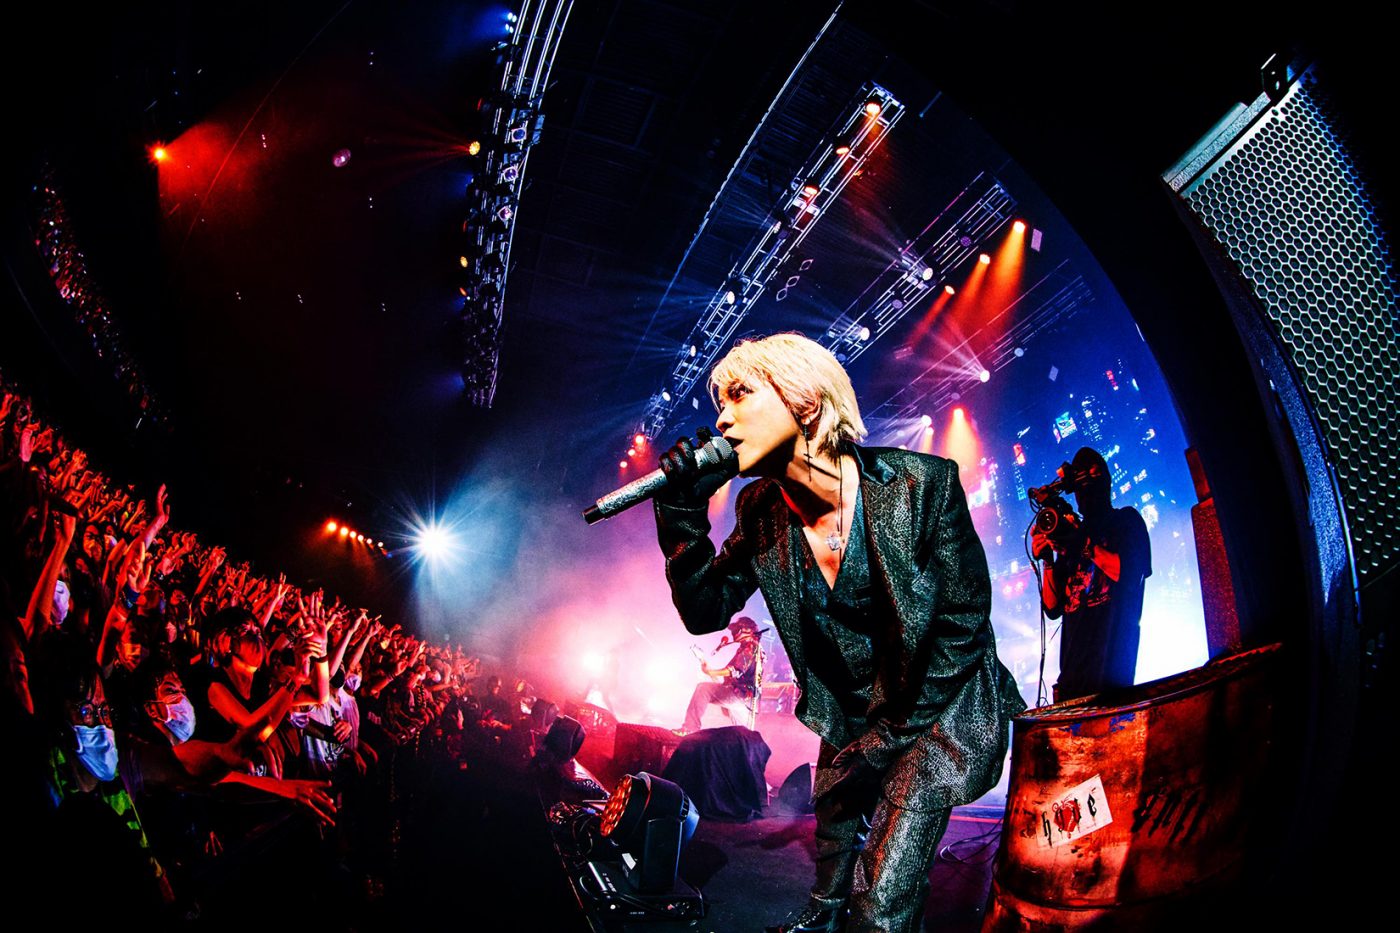 HYDE、『HYDE LIVE 2022』完遂！「また帰ってくるから、首洗って待ってろよ！」 - 画像一覧（11/11）